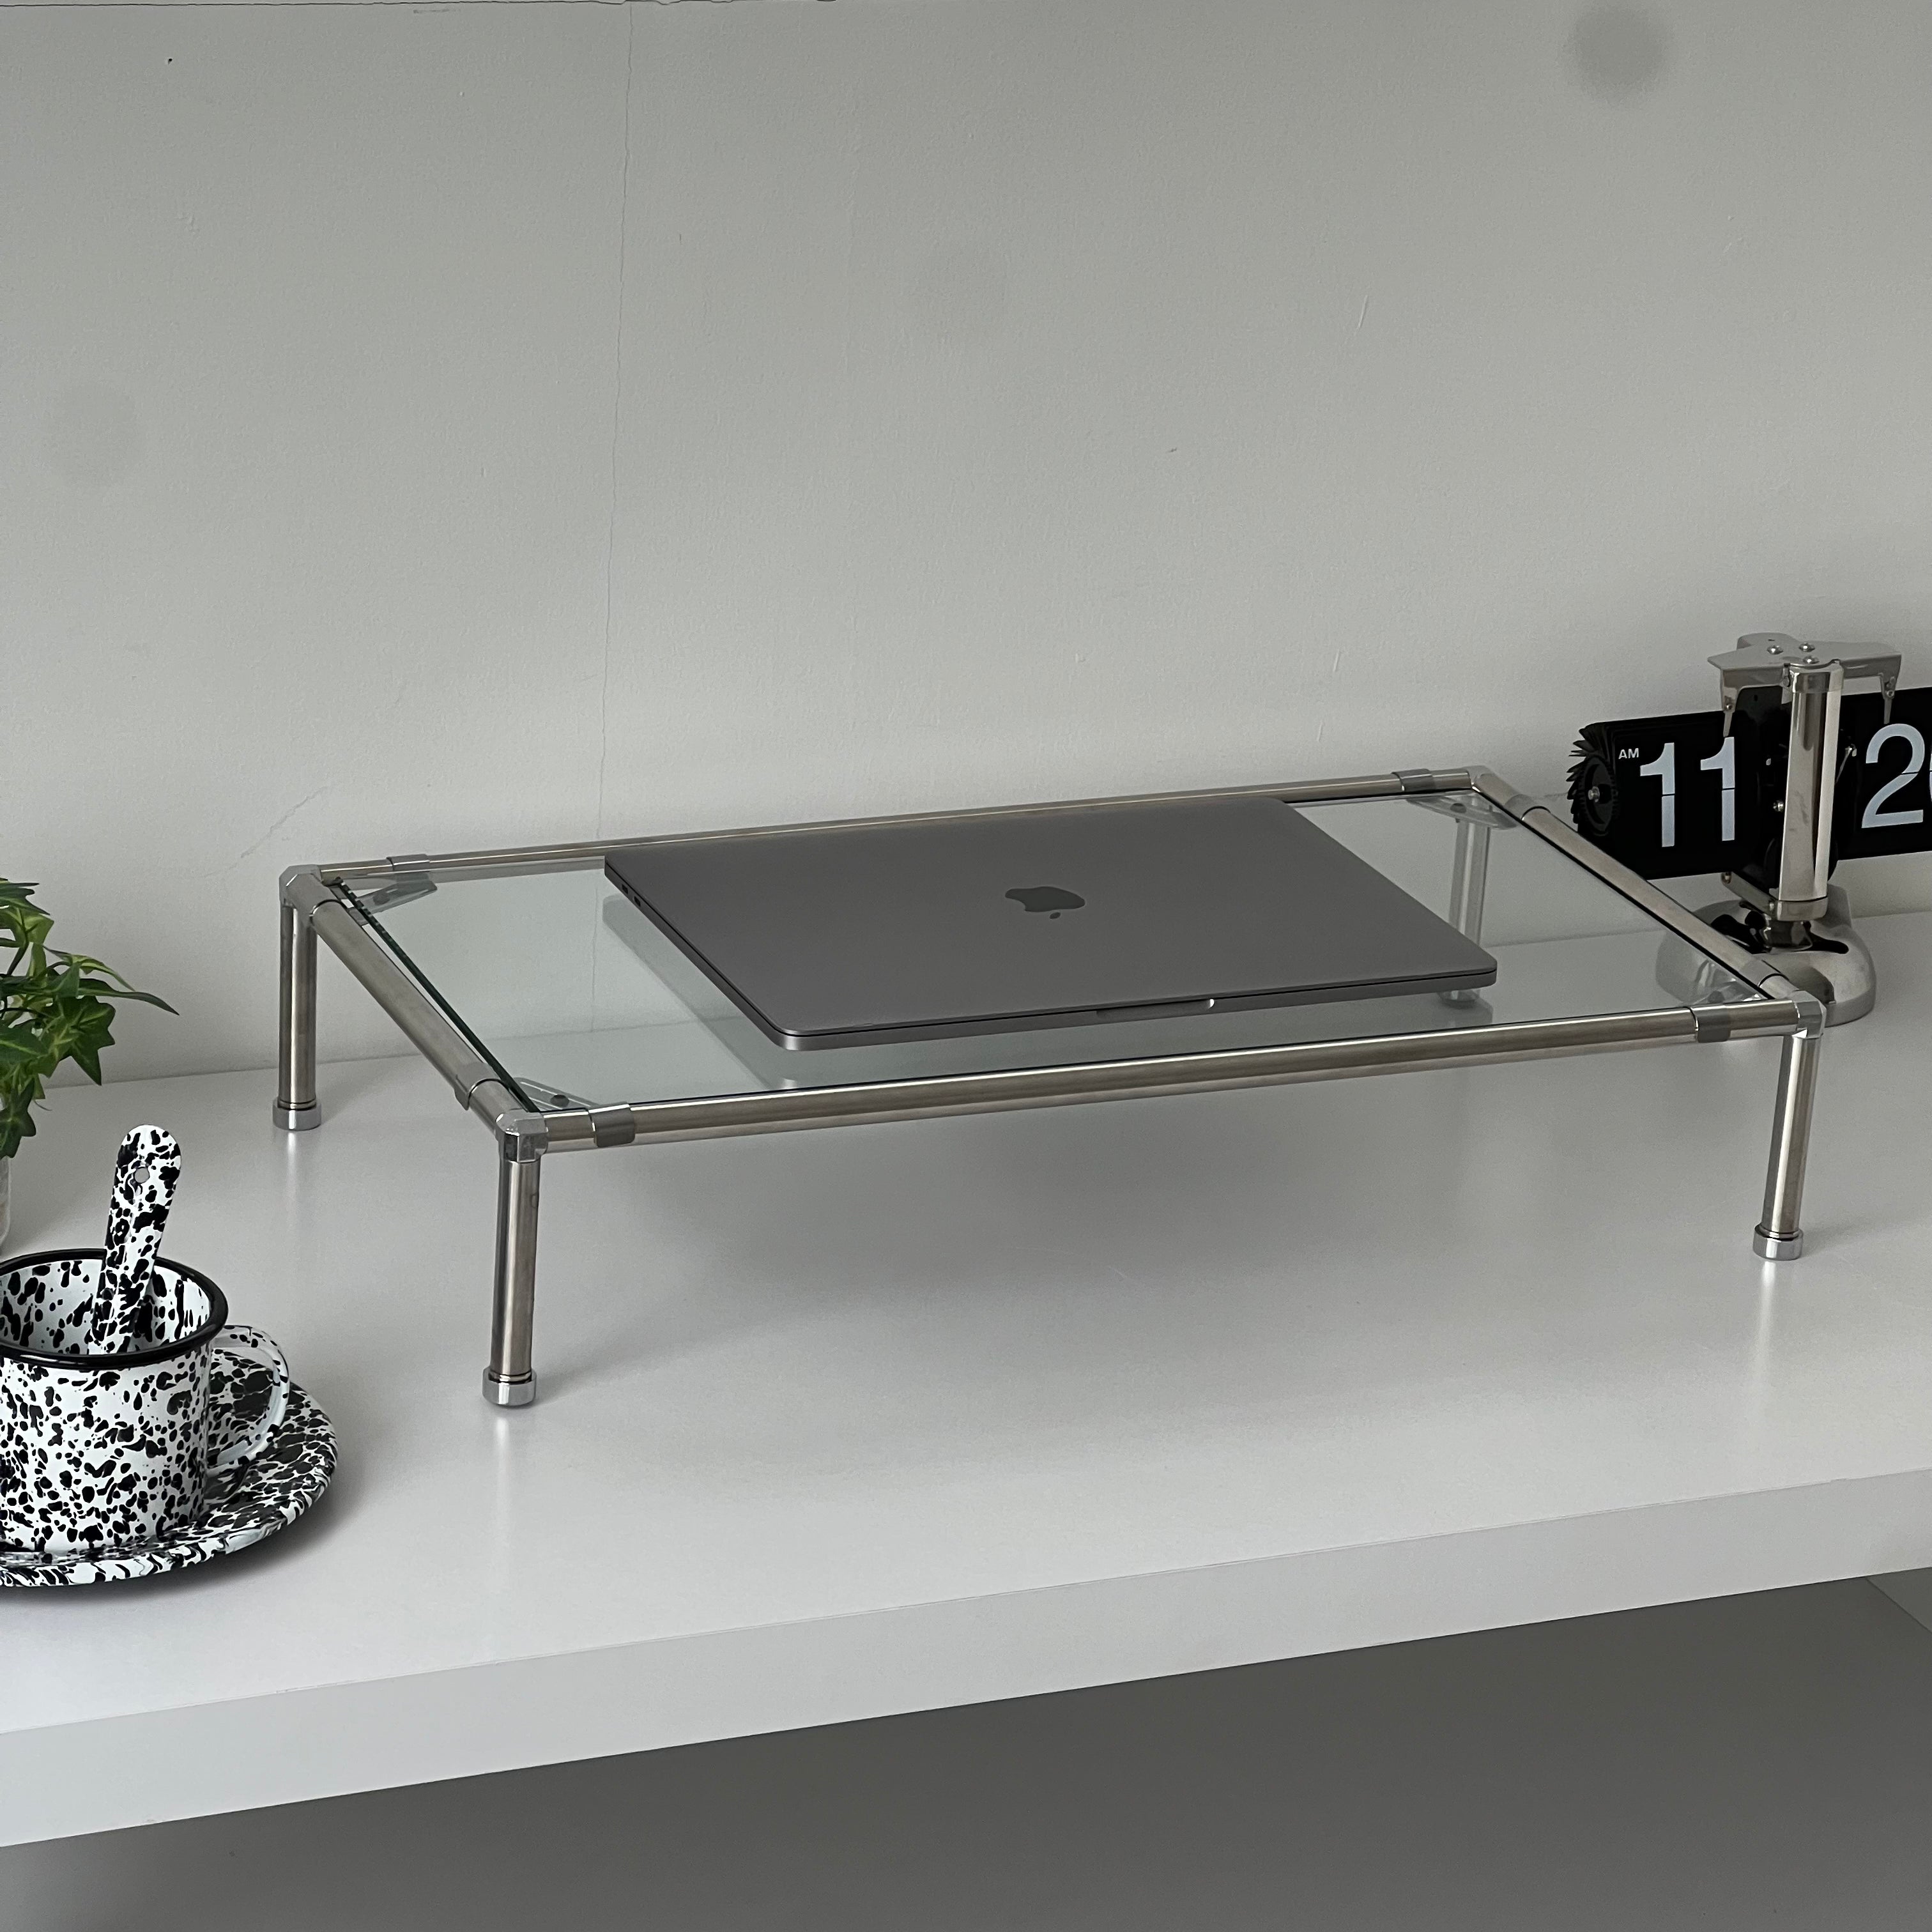 Tool PC stand-2